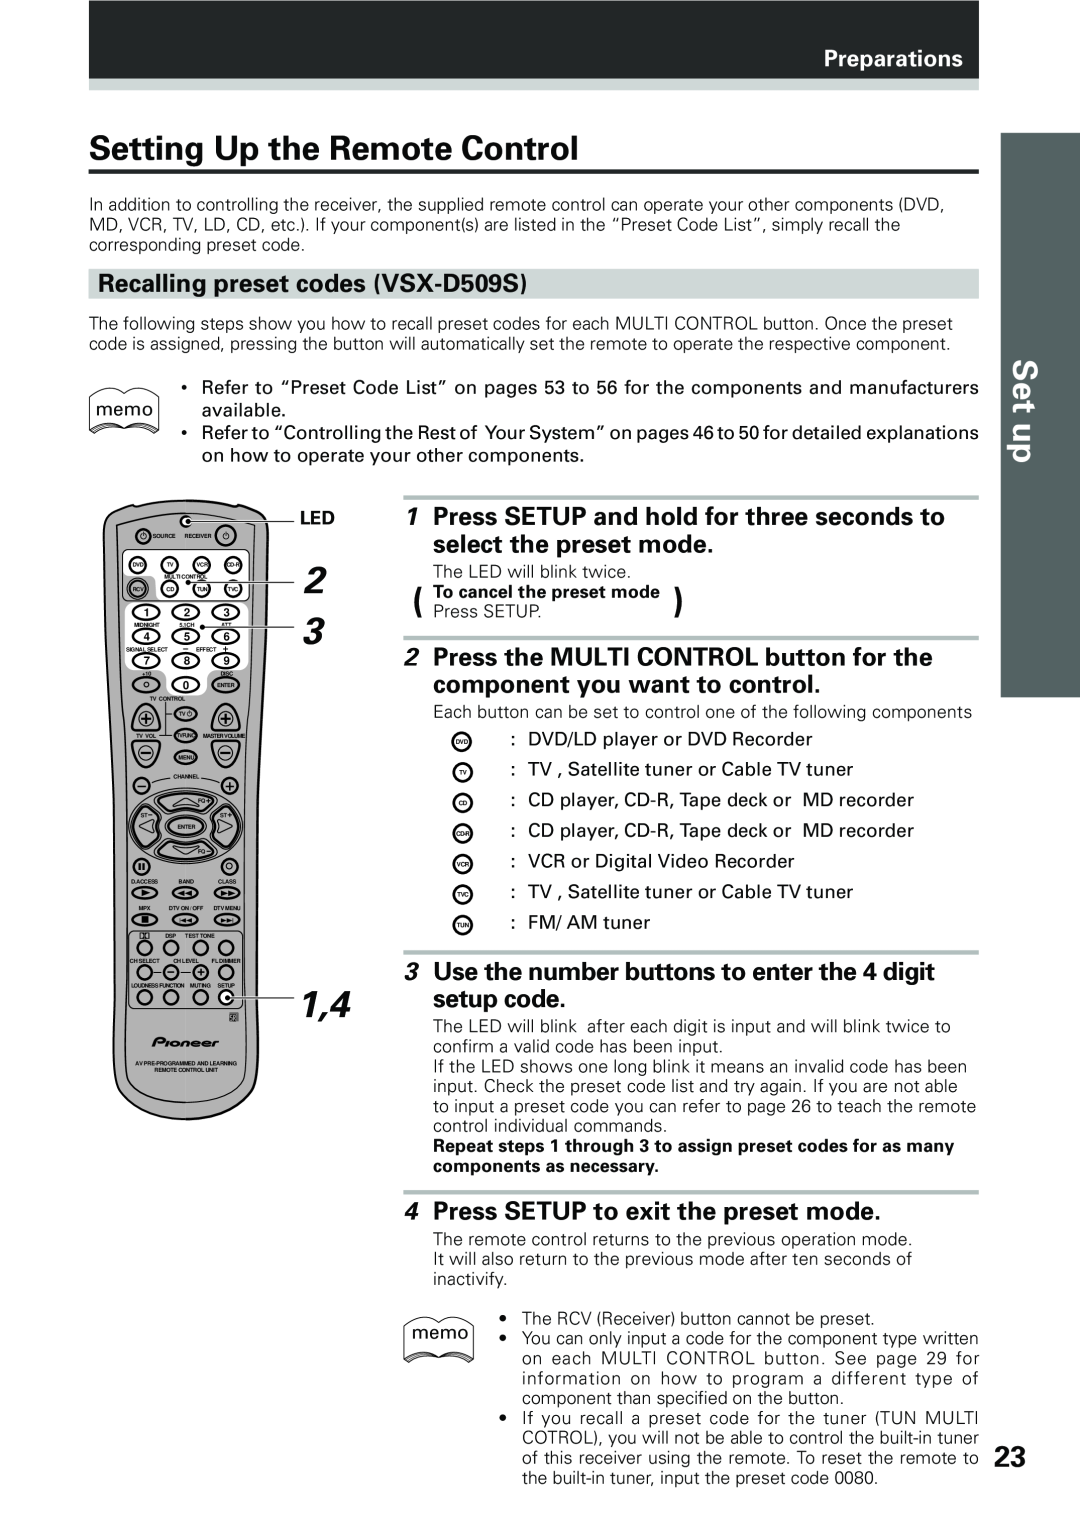 Pioneer VSX-D409 manual Setting Up the Remote Control, Recalling preset codes VSX-D509S, select the preset mode, setup code 